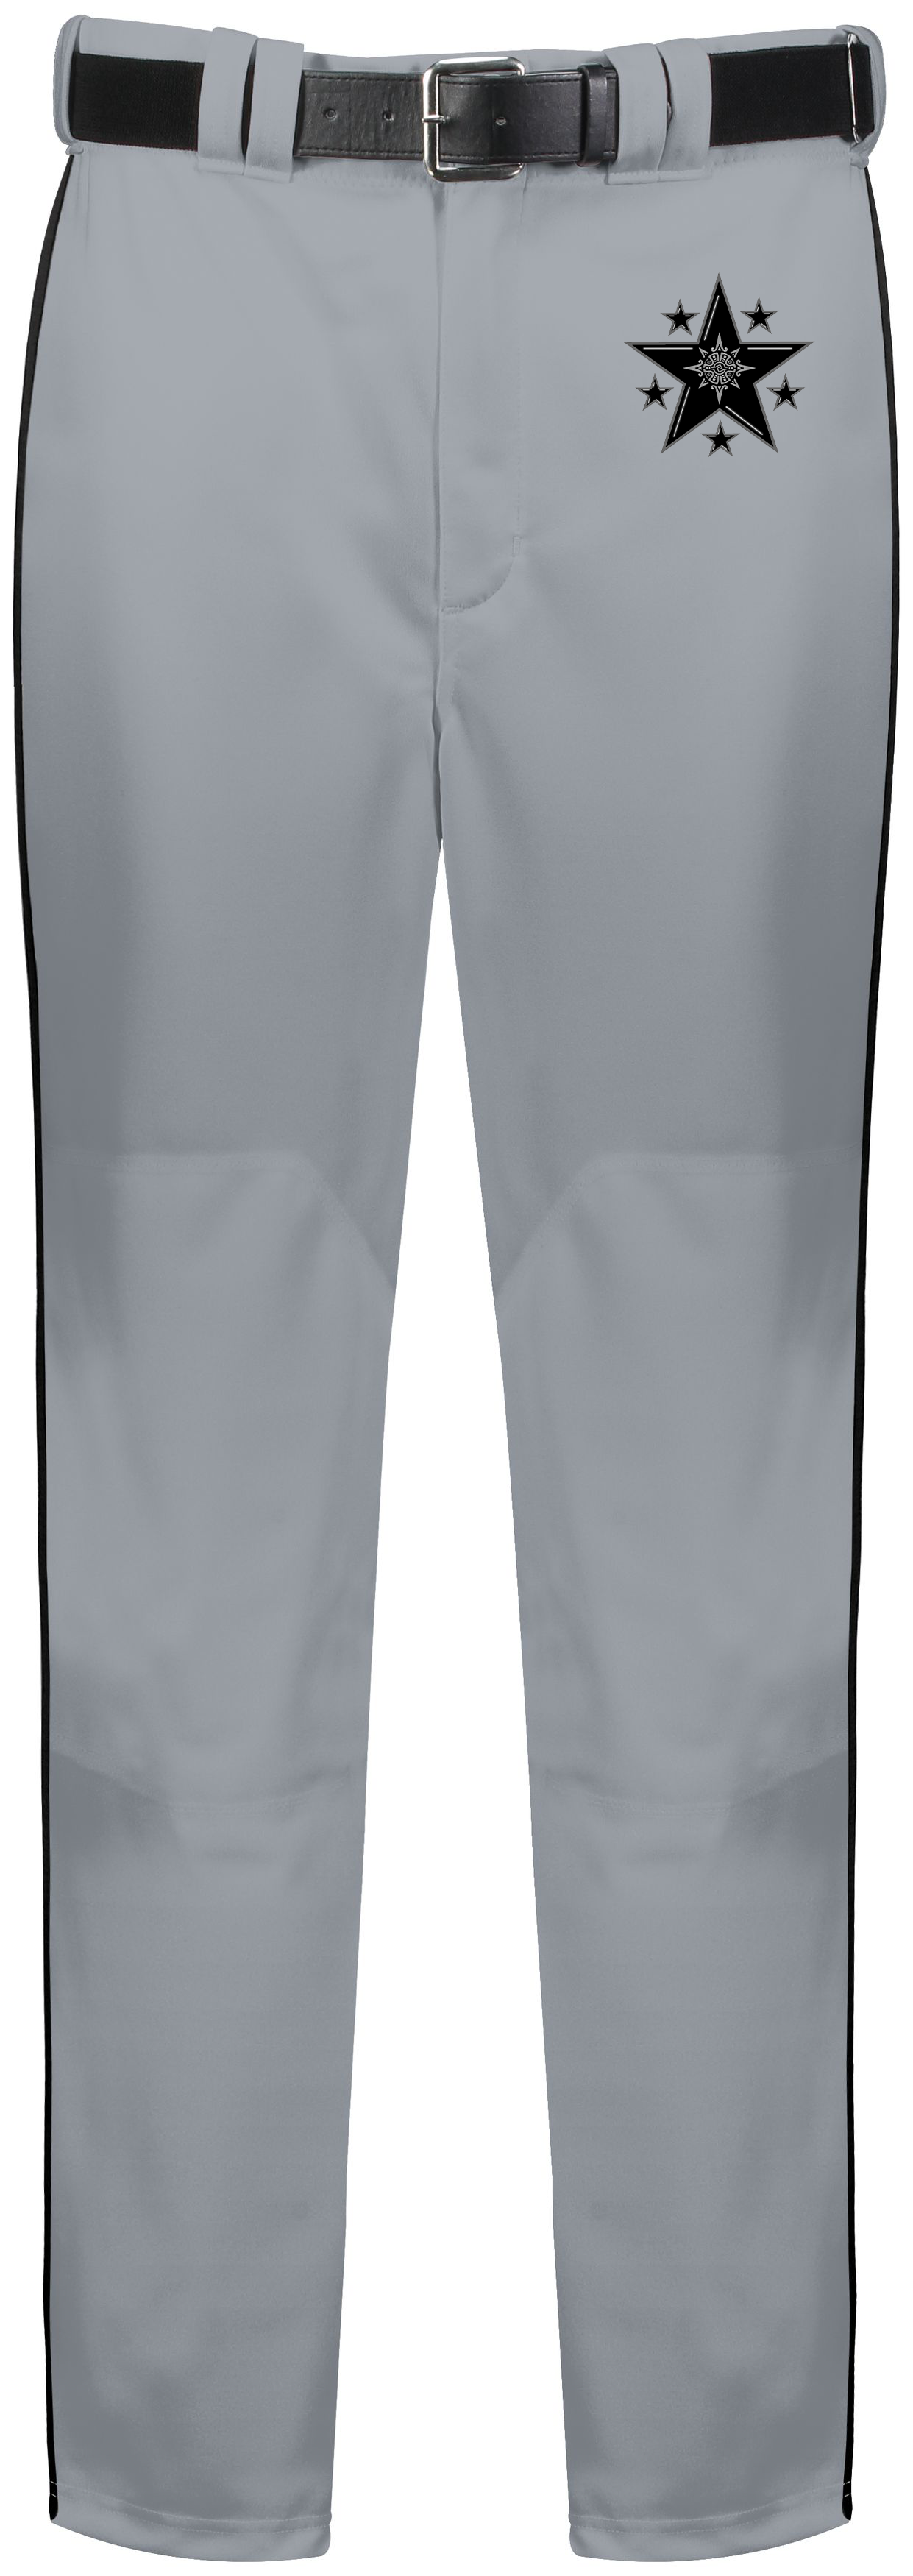 custom design of Russell Athletic R11LGB - Youth Piped Diamond Series Baseball Pant 2.0